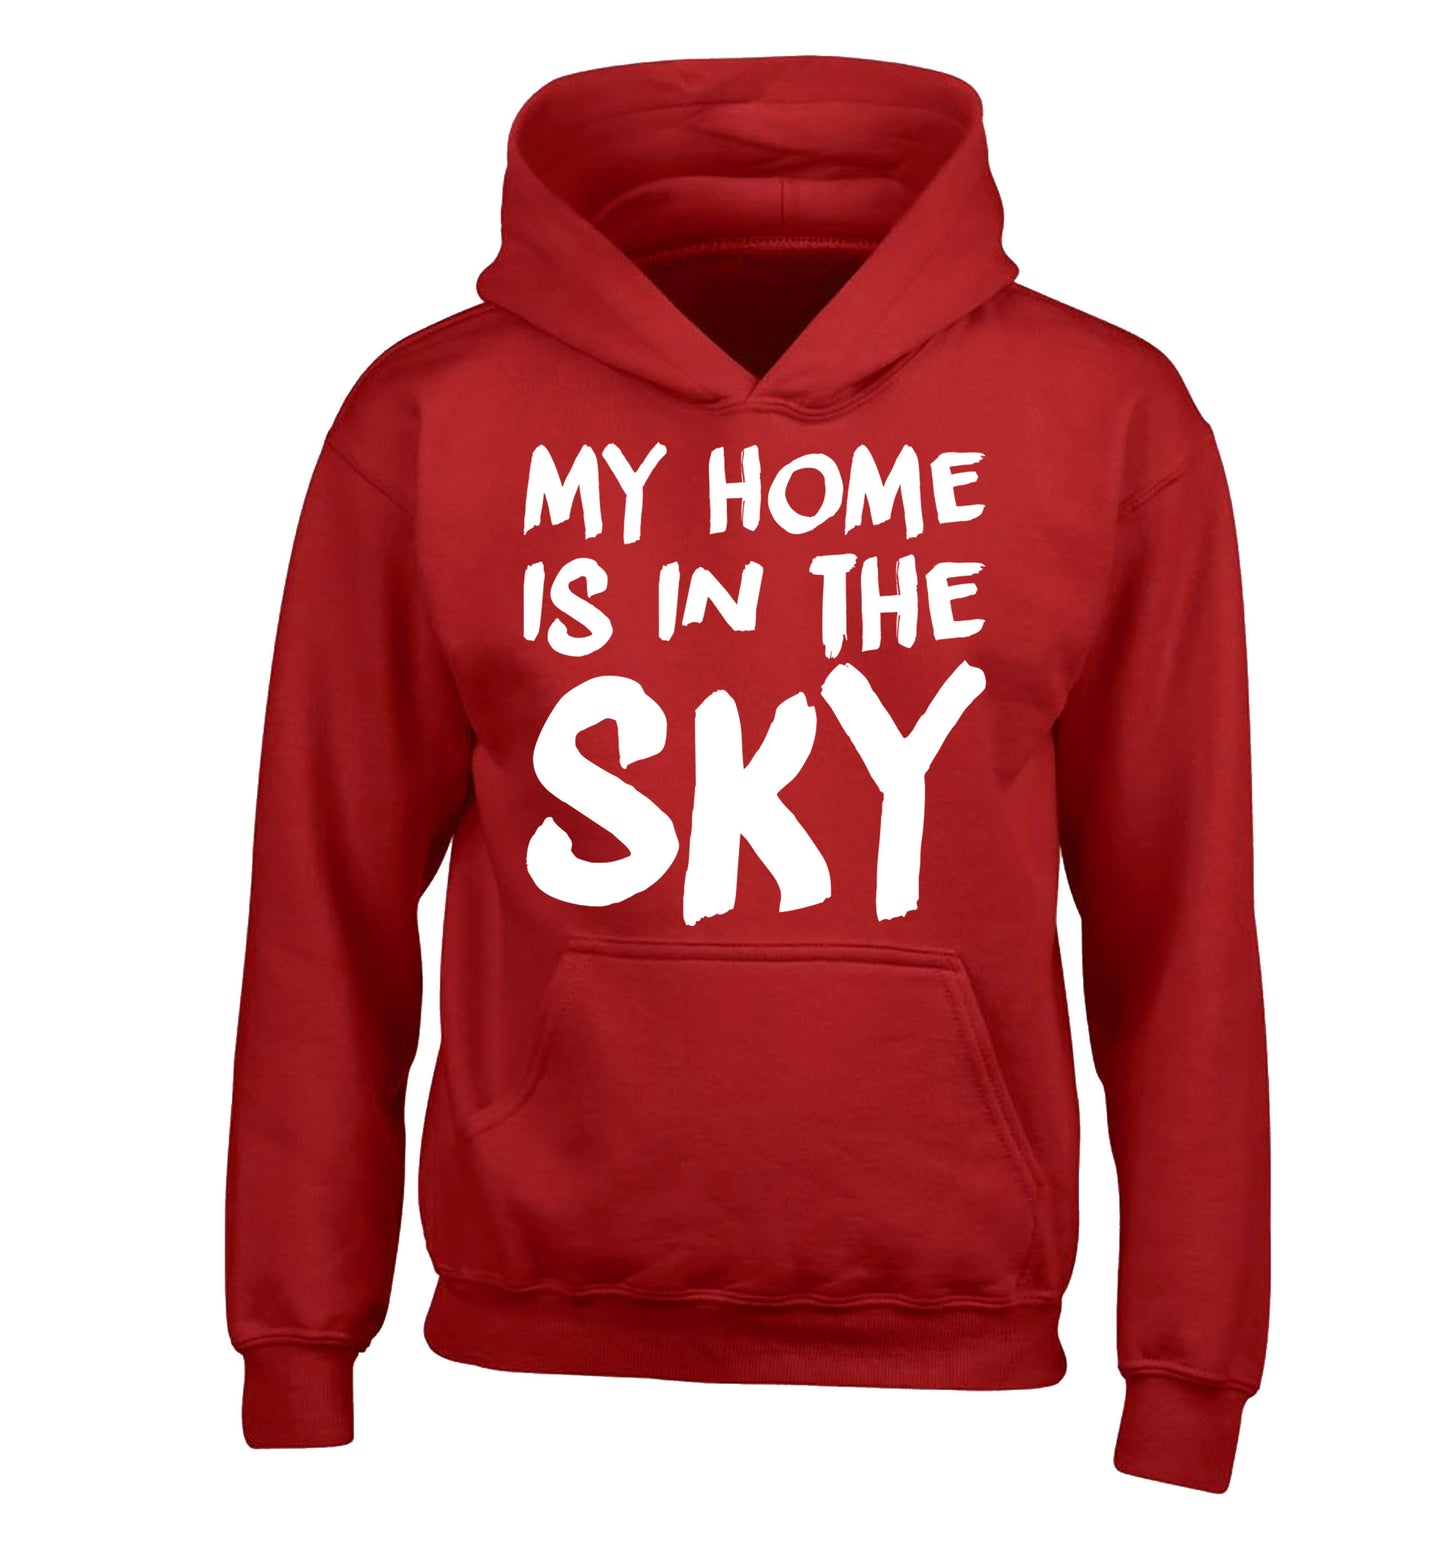 My home is in the sky children's red hoodie 12-14 Years